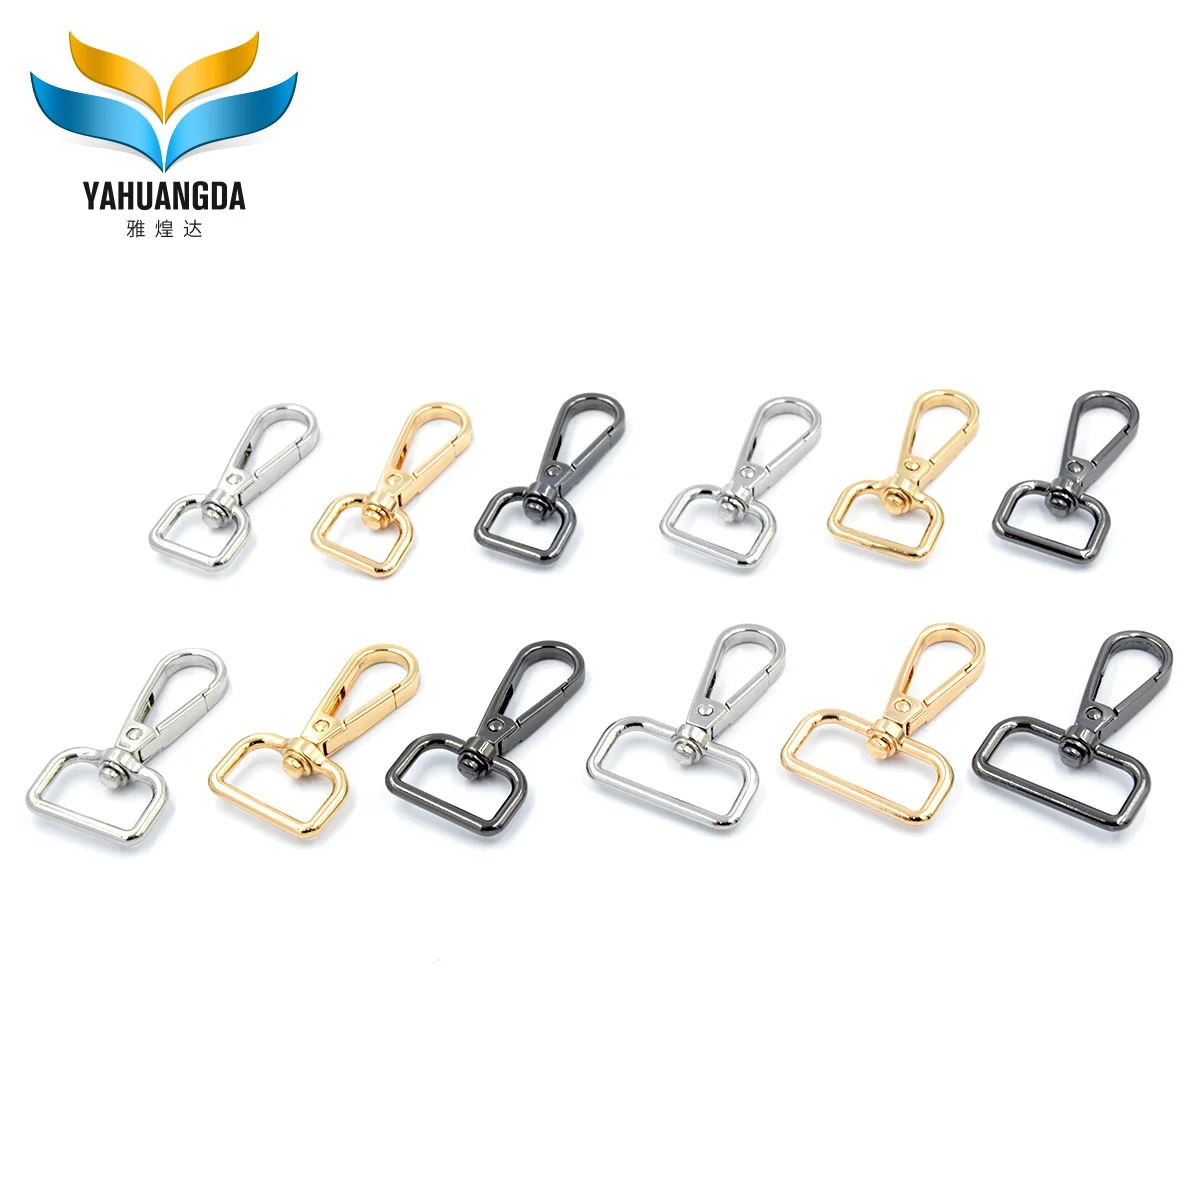 

Alloy Dog Hook Clasps Metal Swivel Snap Hook Buckle Hardware Accessories for Keychain Bags Strap Lobster Buckle Hook FK4